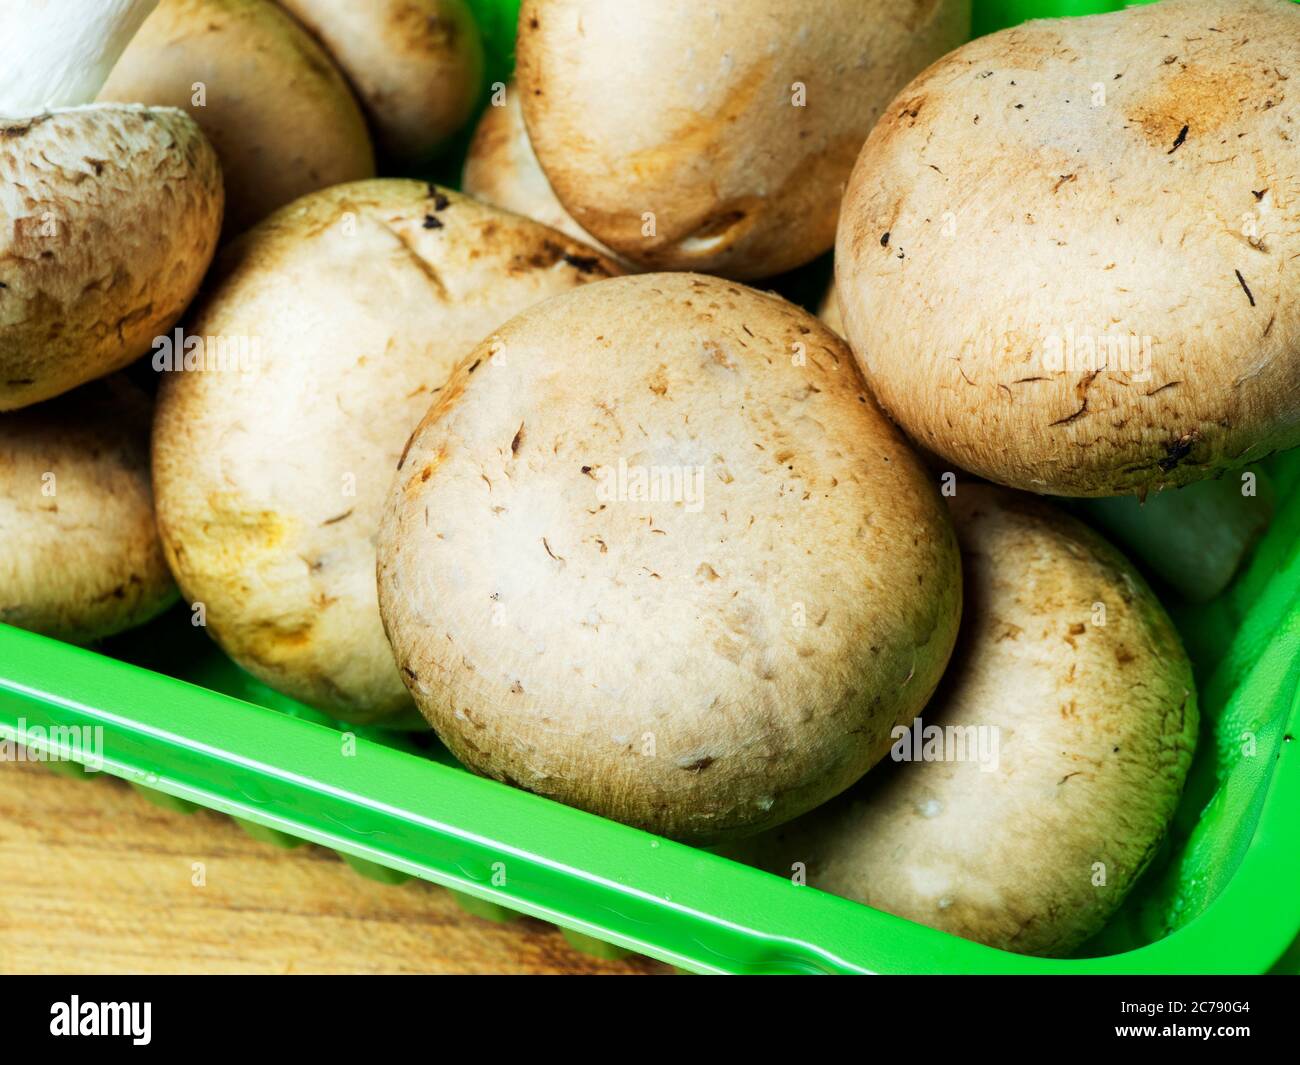 Punnet of chestnut mushrooms from a supermarket Stock Photo